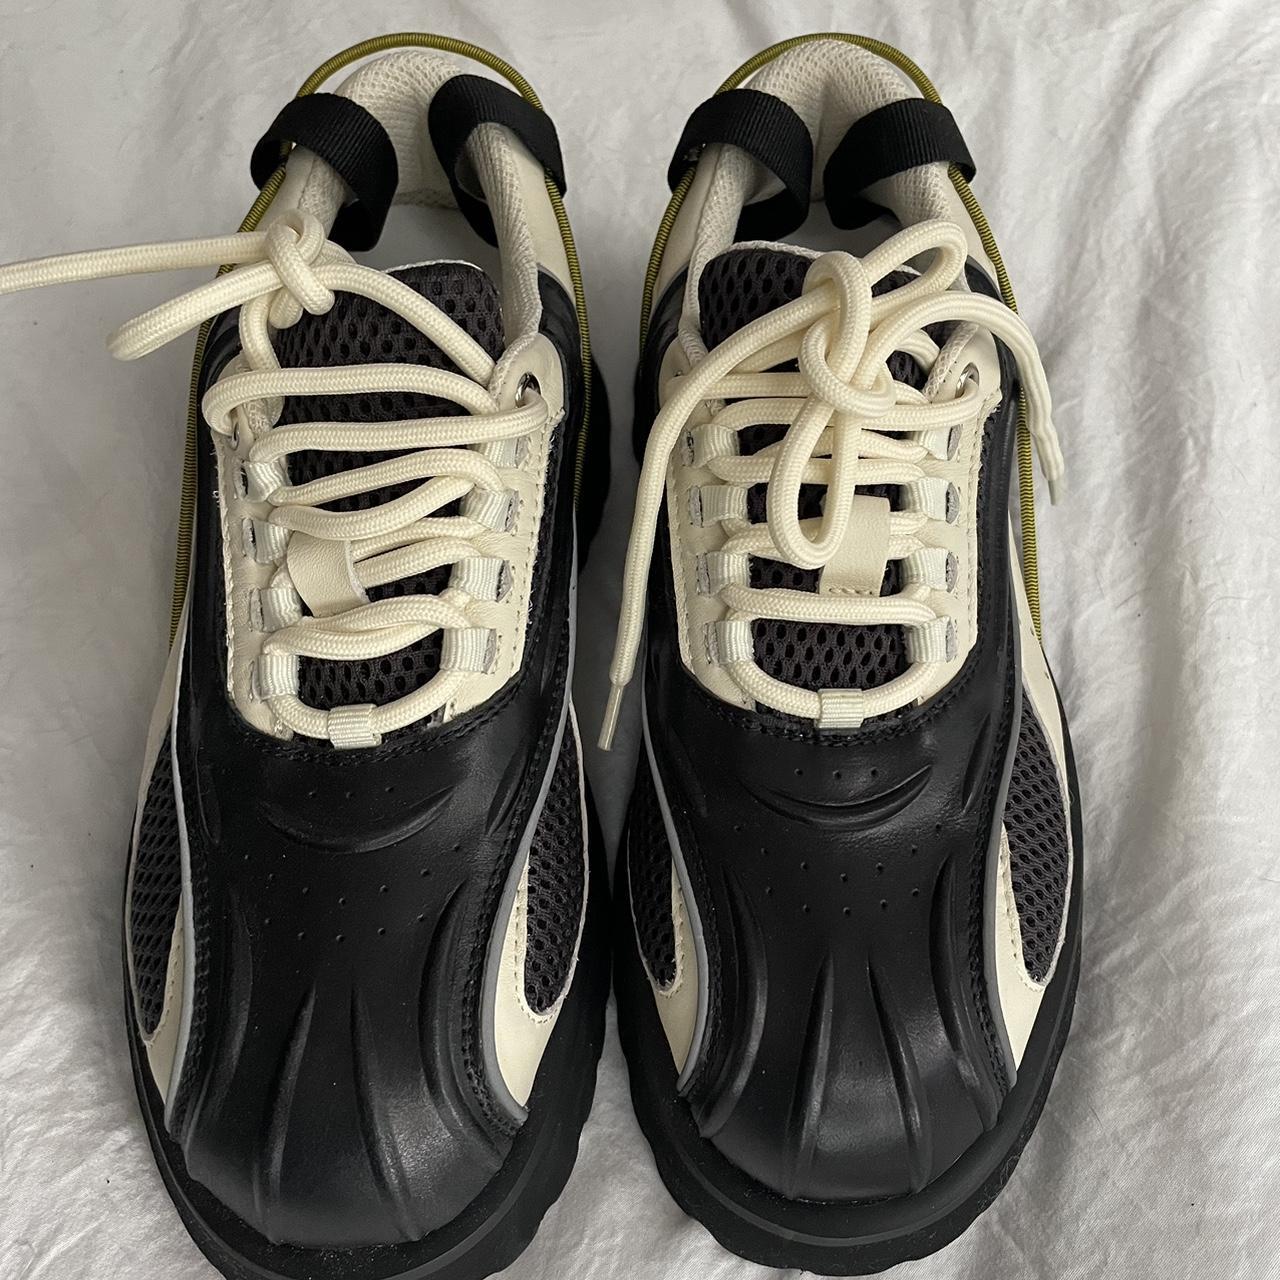 Women's Black and White Trainers (5)